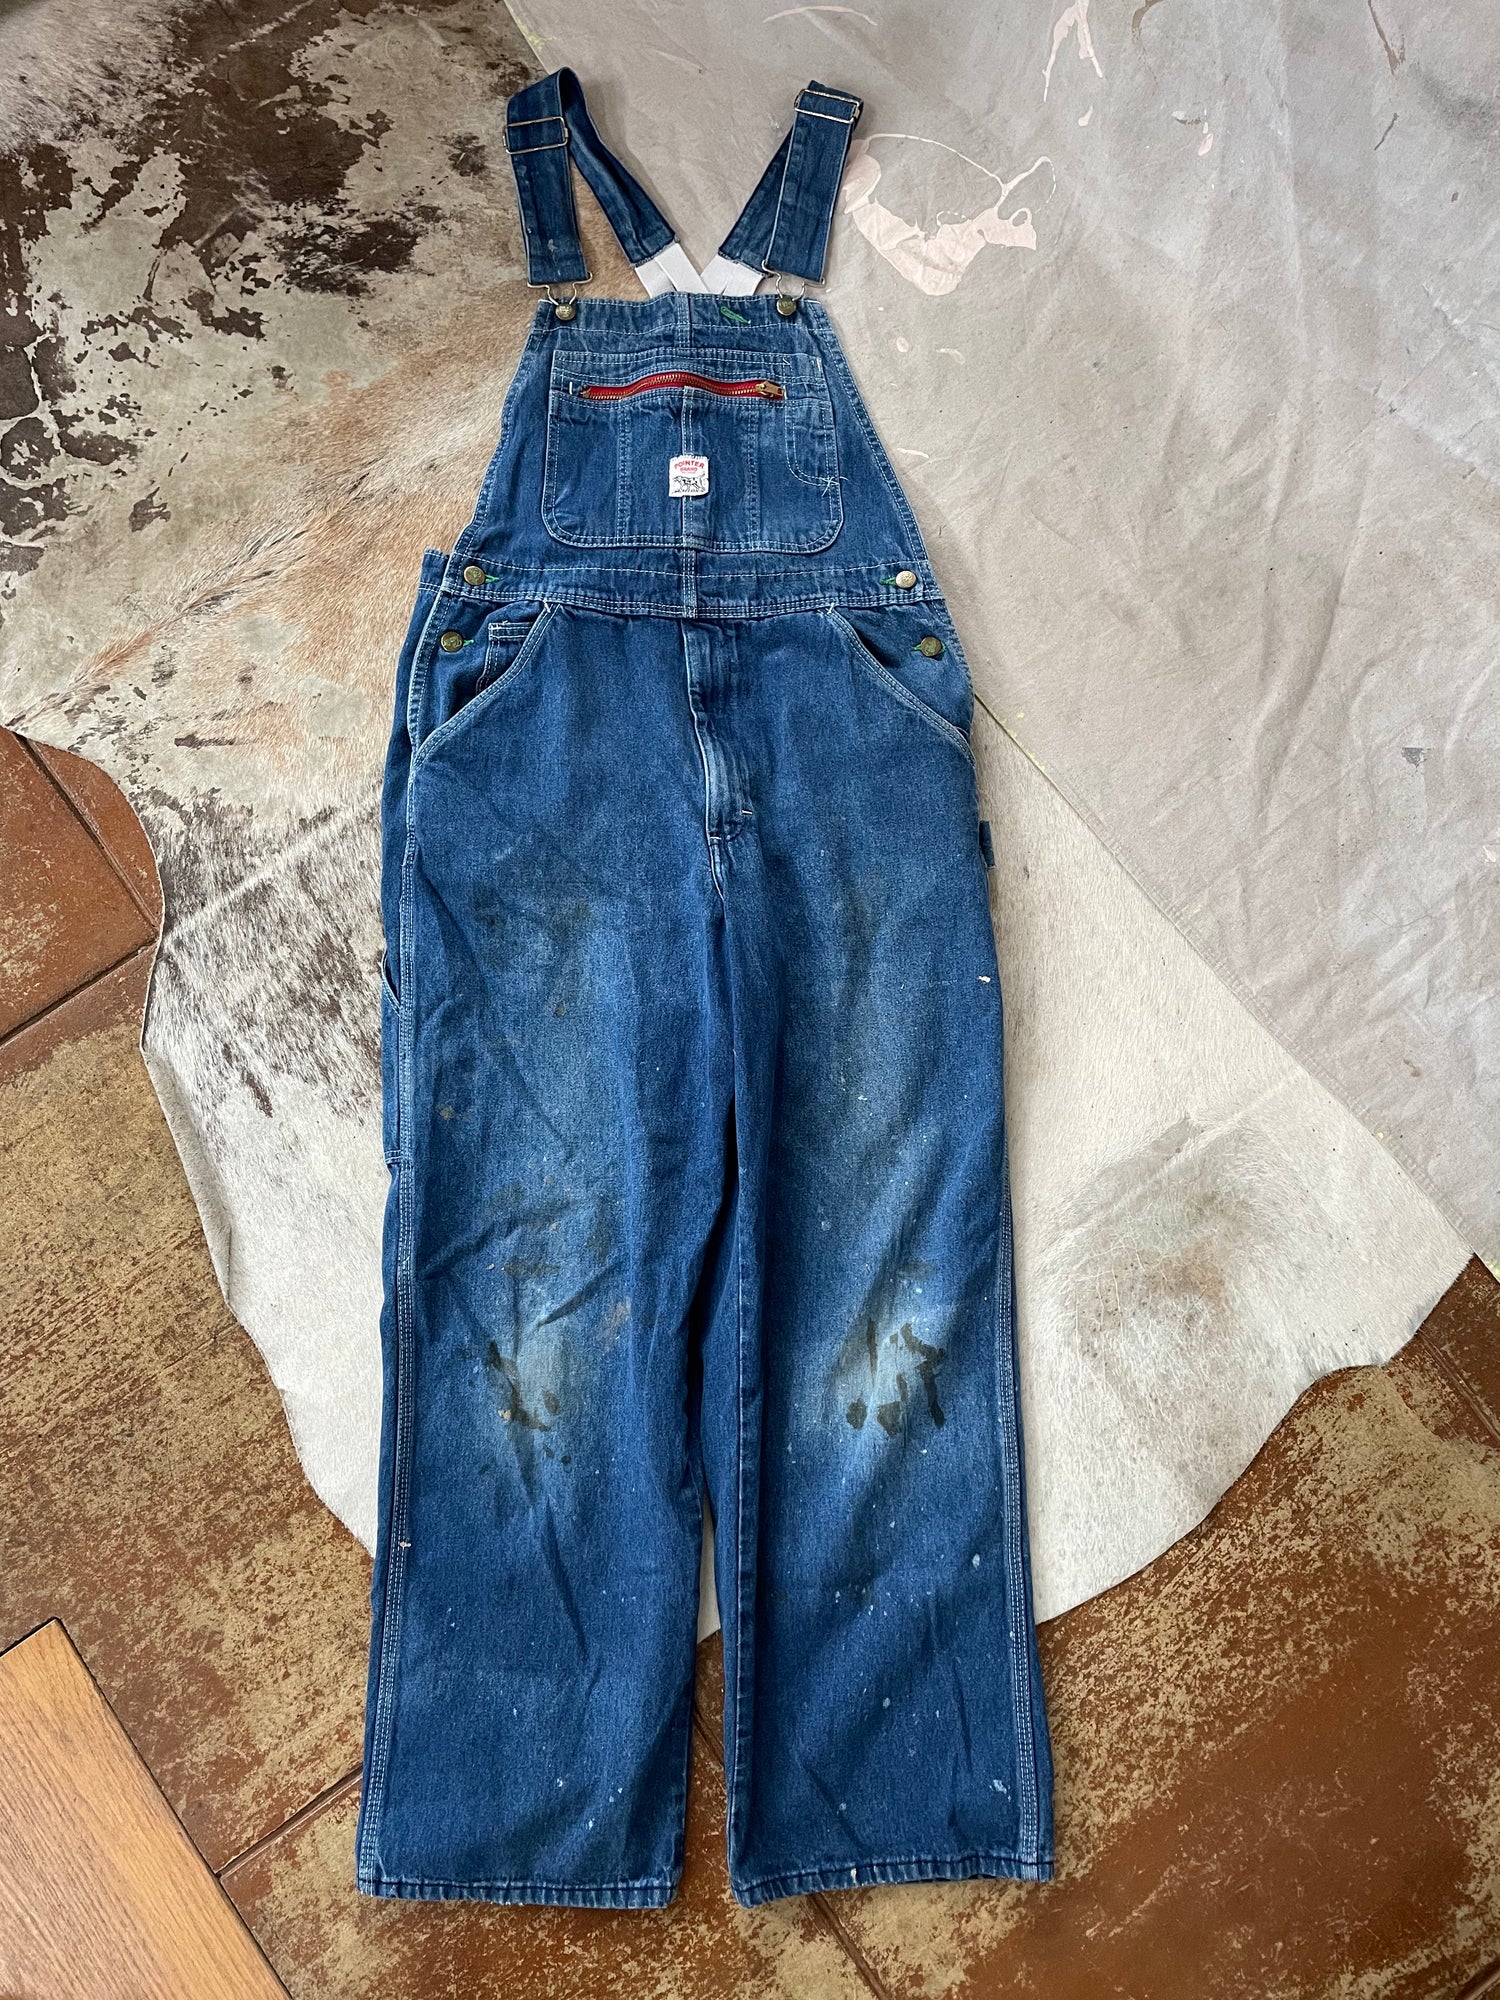 Pointer Brand Low Back Overalls – Double Barrel Dry Goods